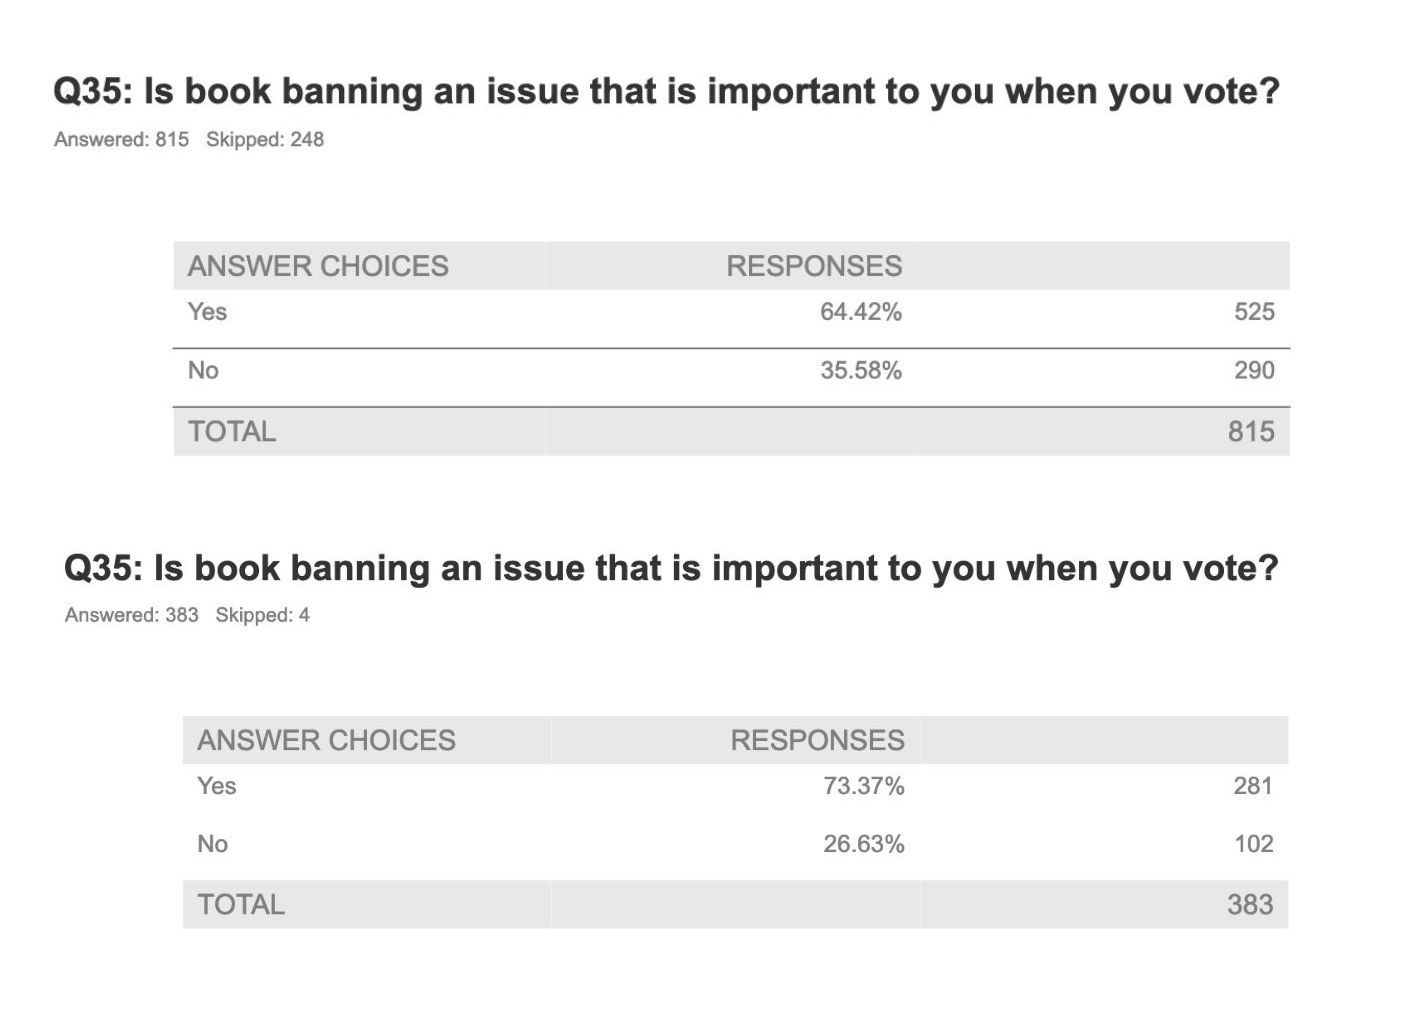 Image comparing those who believe book banning is an issue when they vote. 